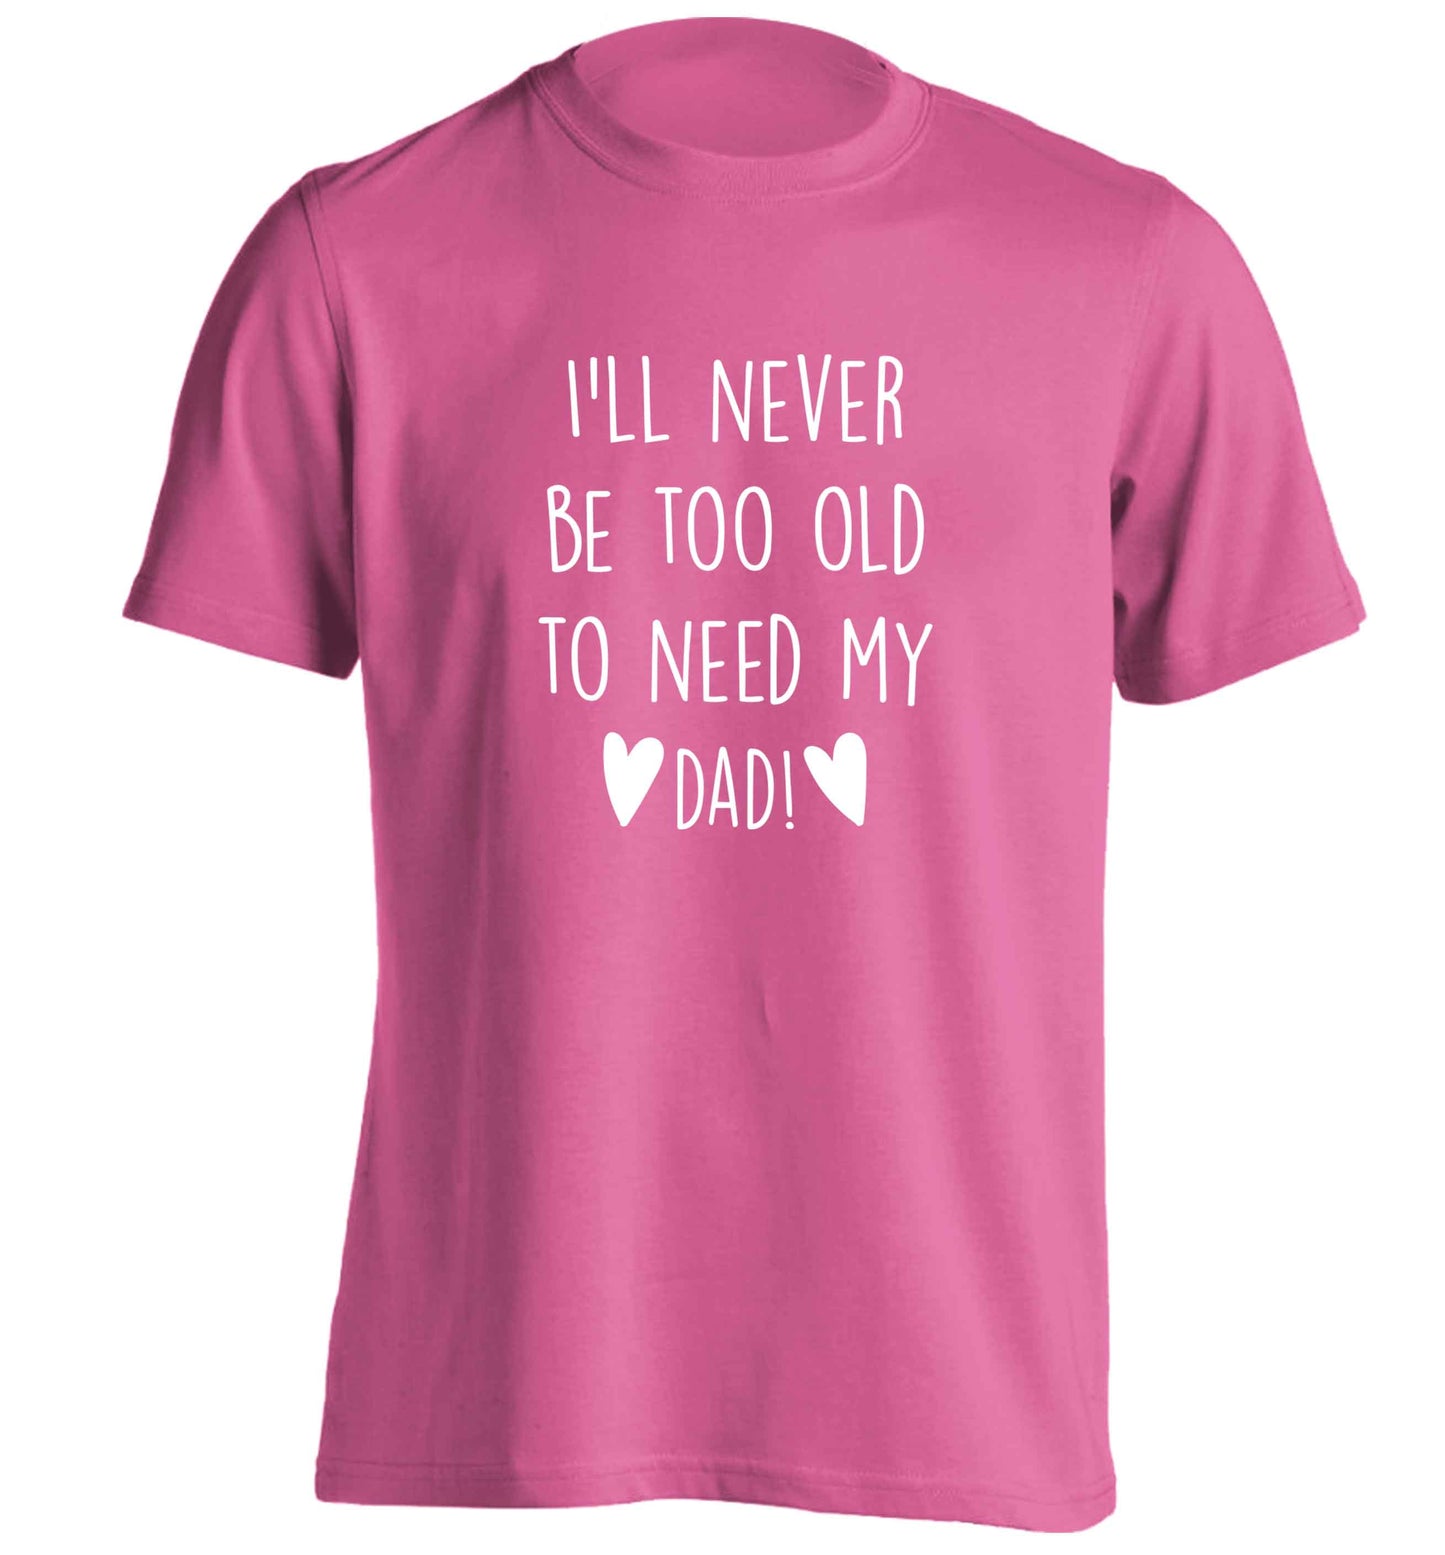 I'll never be too old to need my dad adults unisex pink Tshirt 2XL